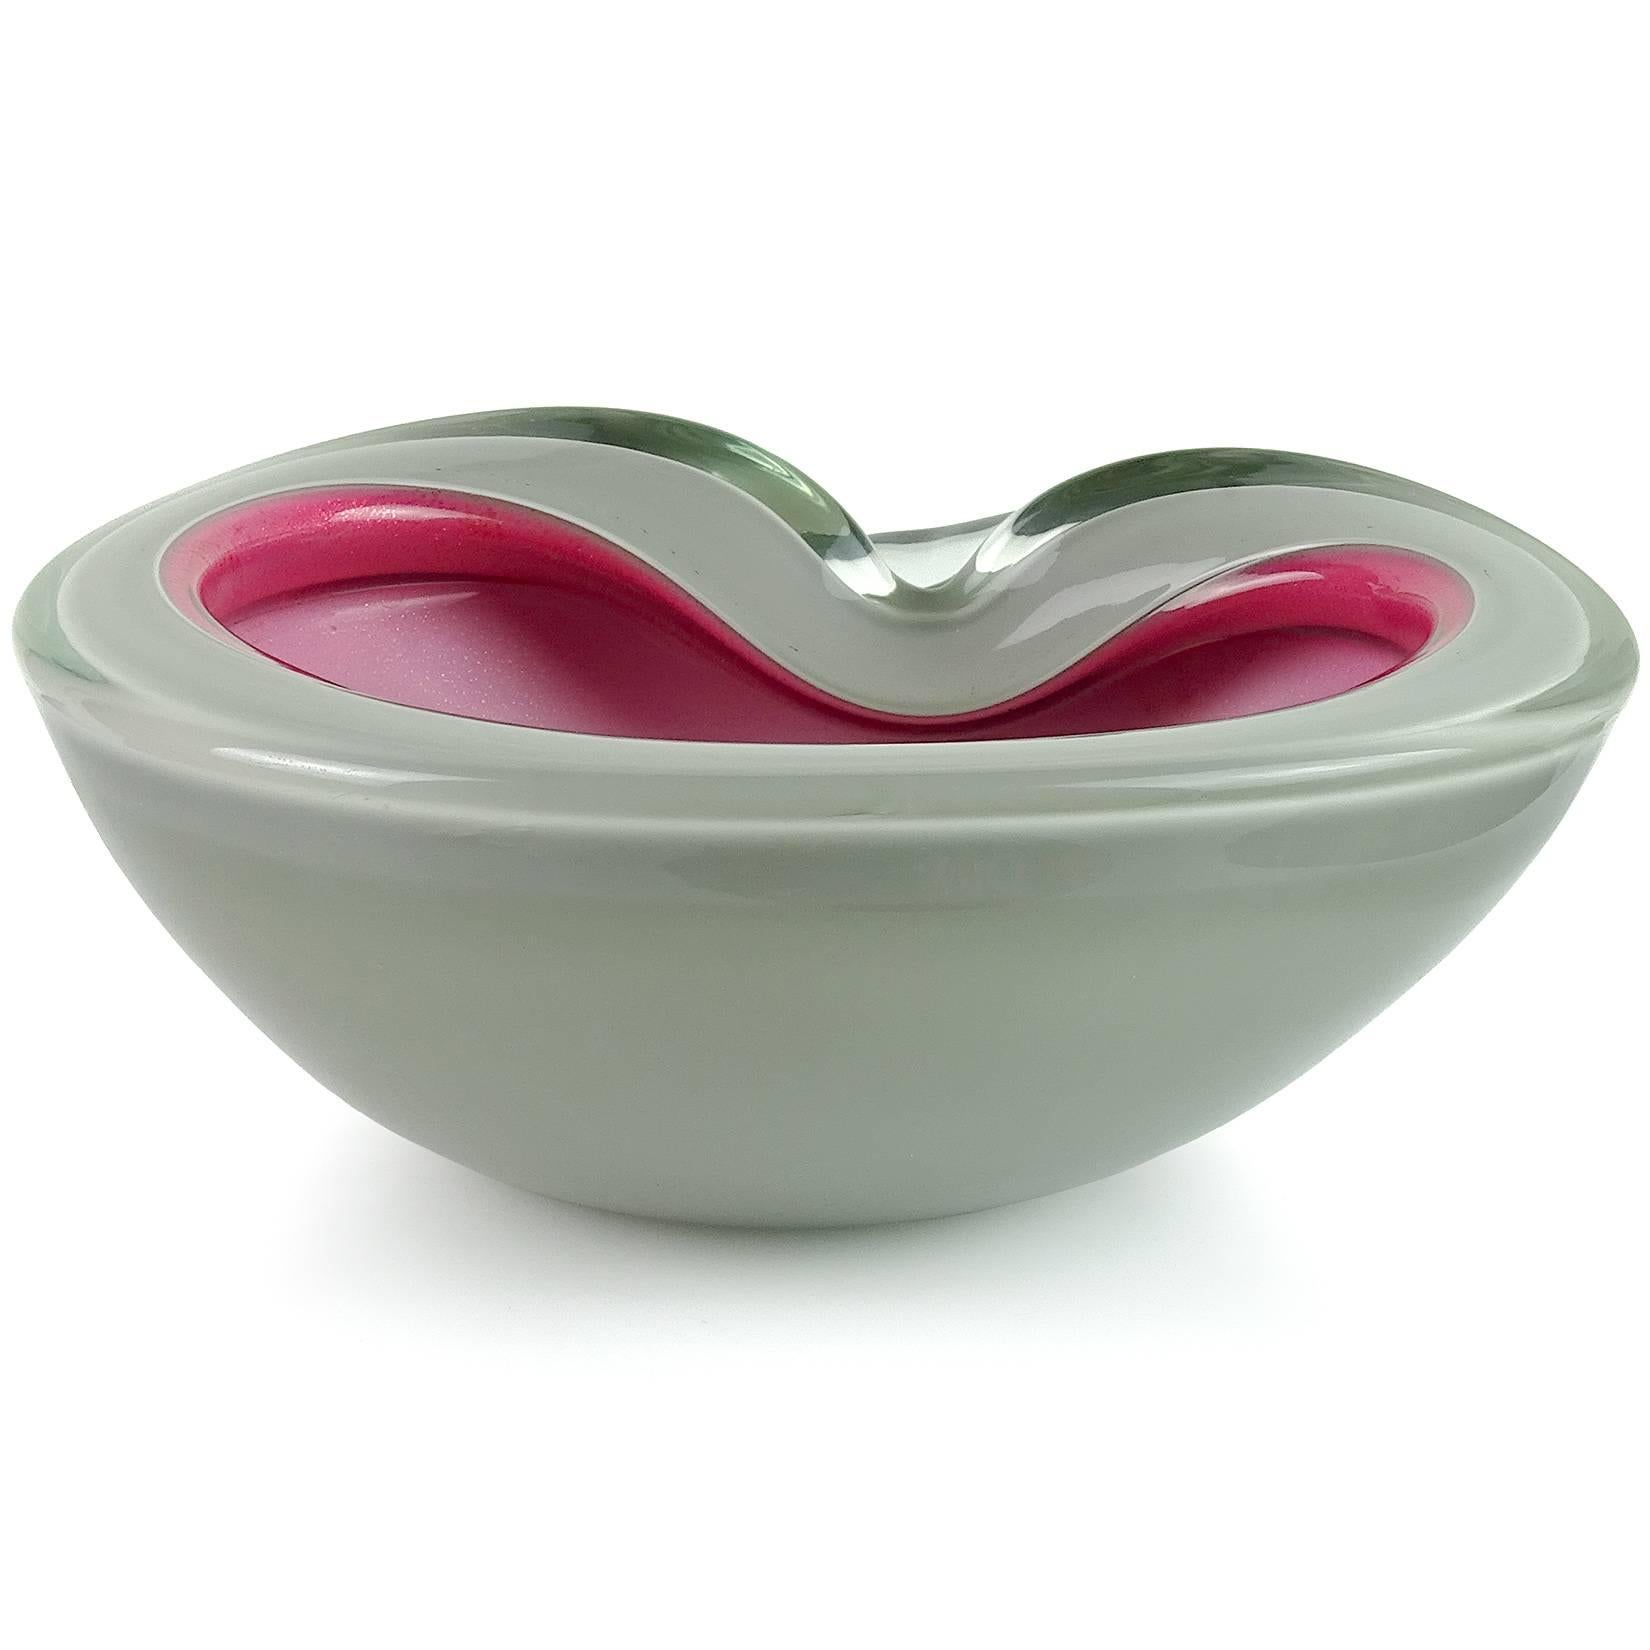 Beautiful vintage Murano hand blown gray over fuchsia pink and gold flecks Italian art glass decorative bowl. Documented to designer Alfredo Barbini. The piece has a partial worn label underneath the bowl. Great accent / display piece on any table.